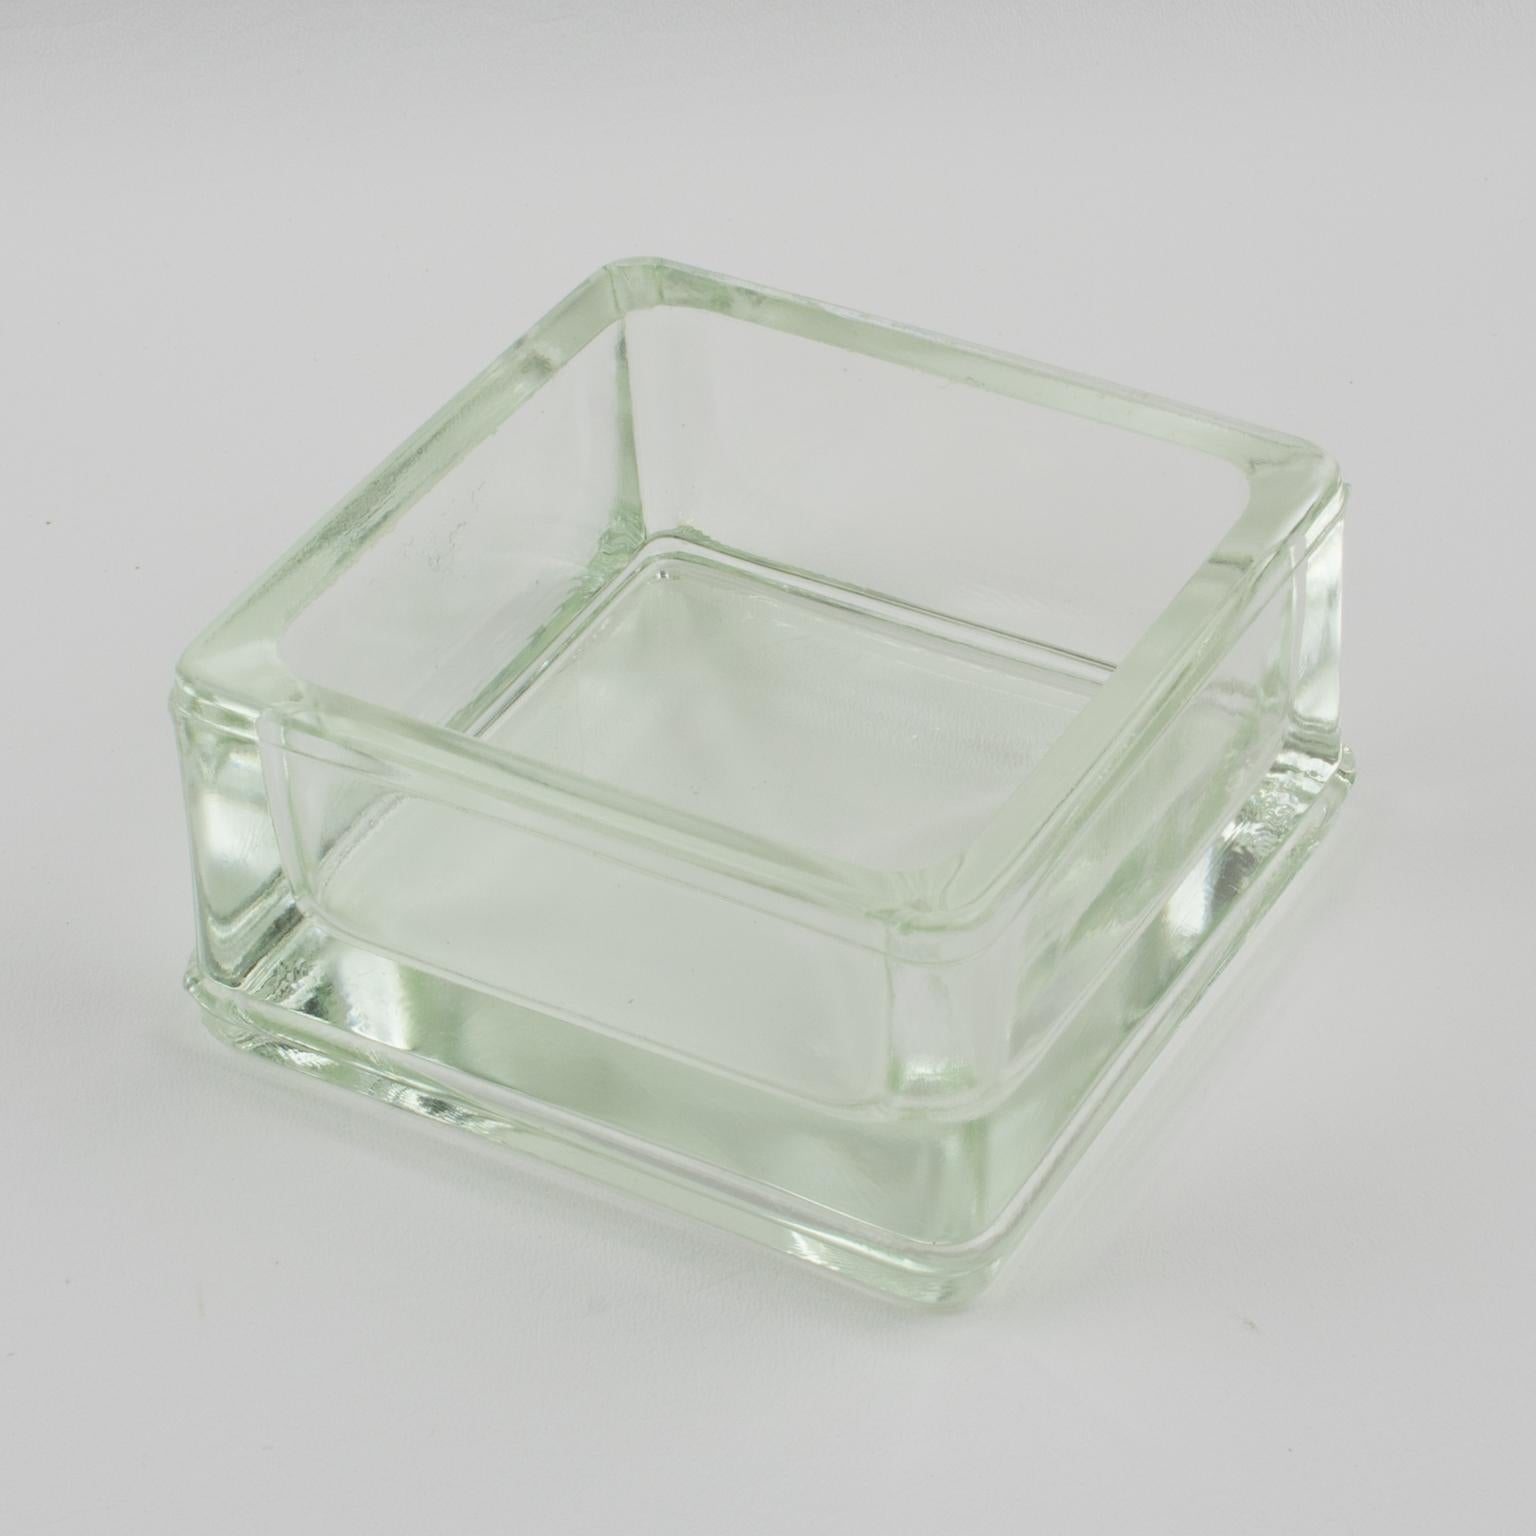 Mid-20th Century Le Corbusier for Lumax Molded Glass Desk Accessory Ashtray Catchall For Sale